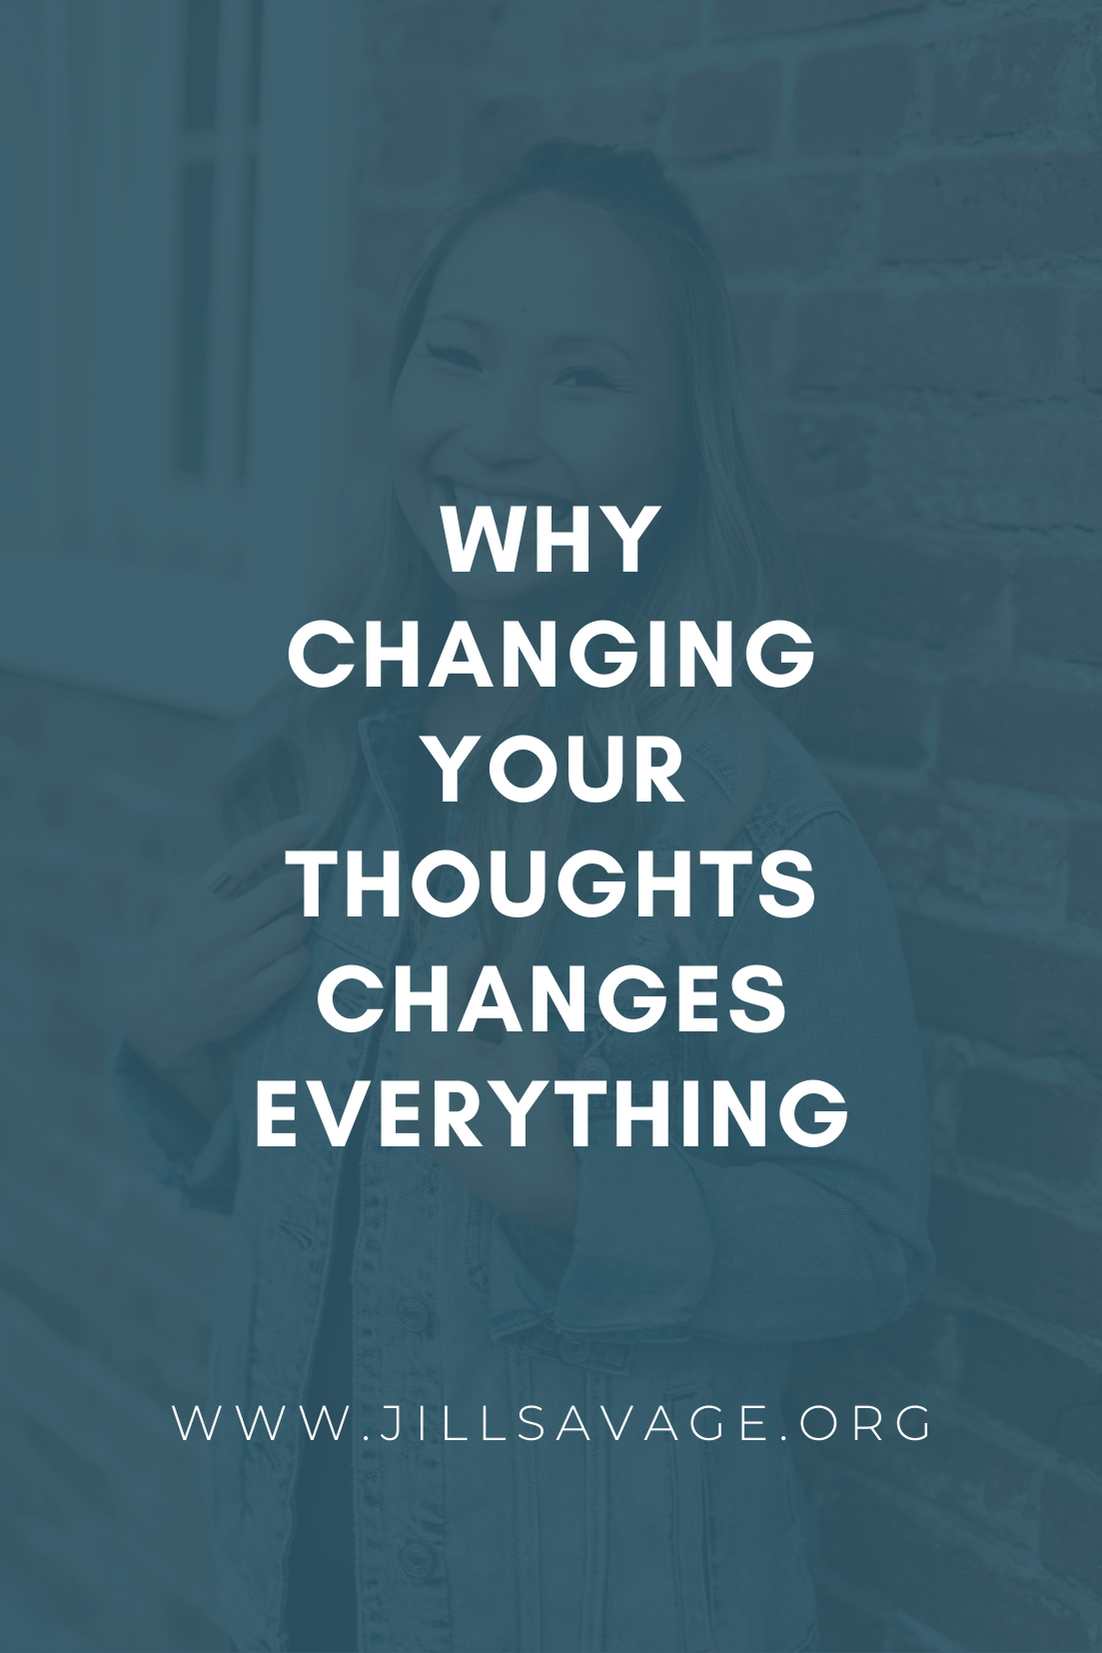 Why Changing Your Thoughts Changes Everything